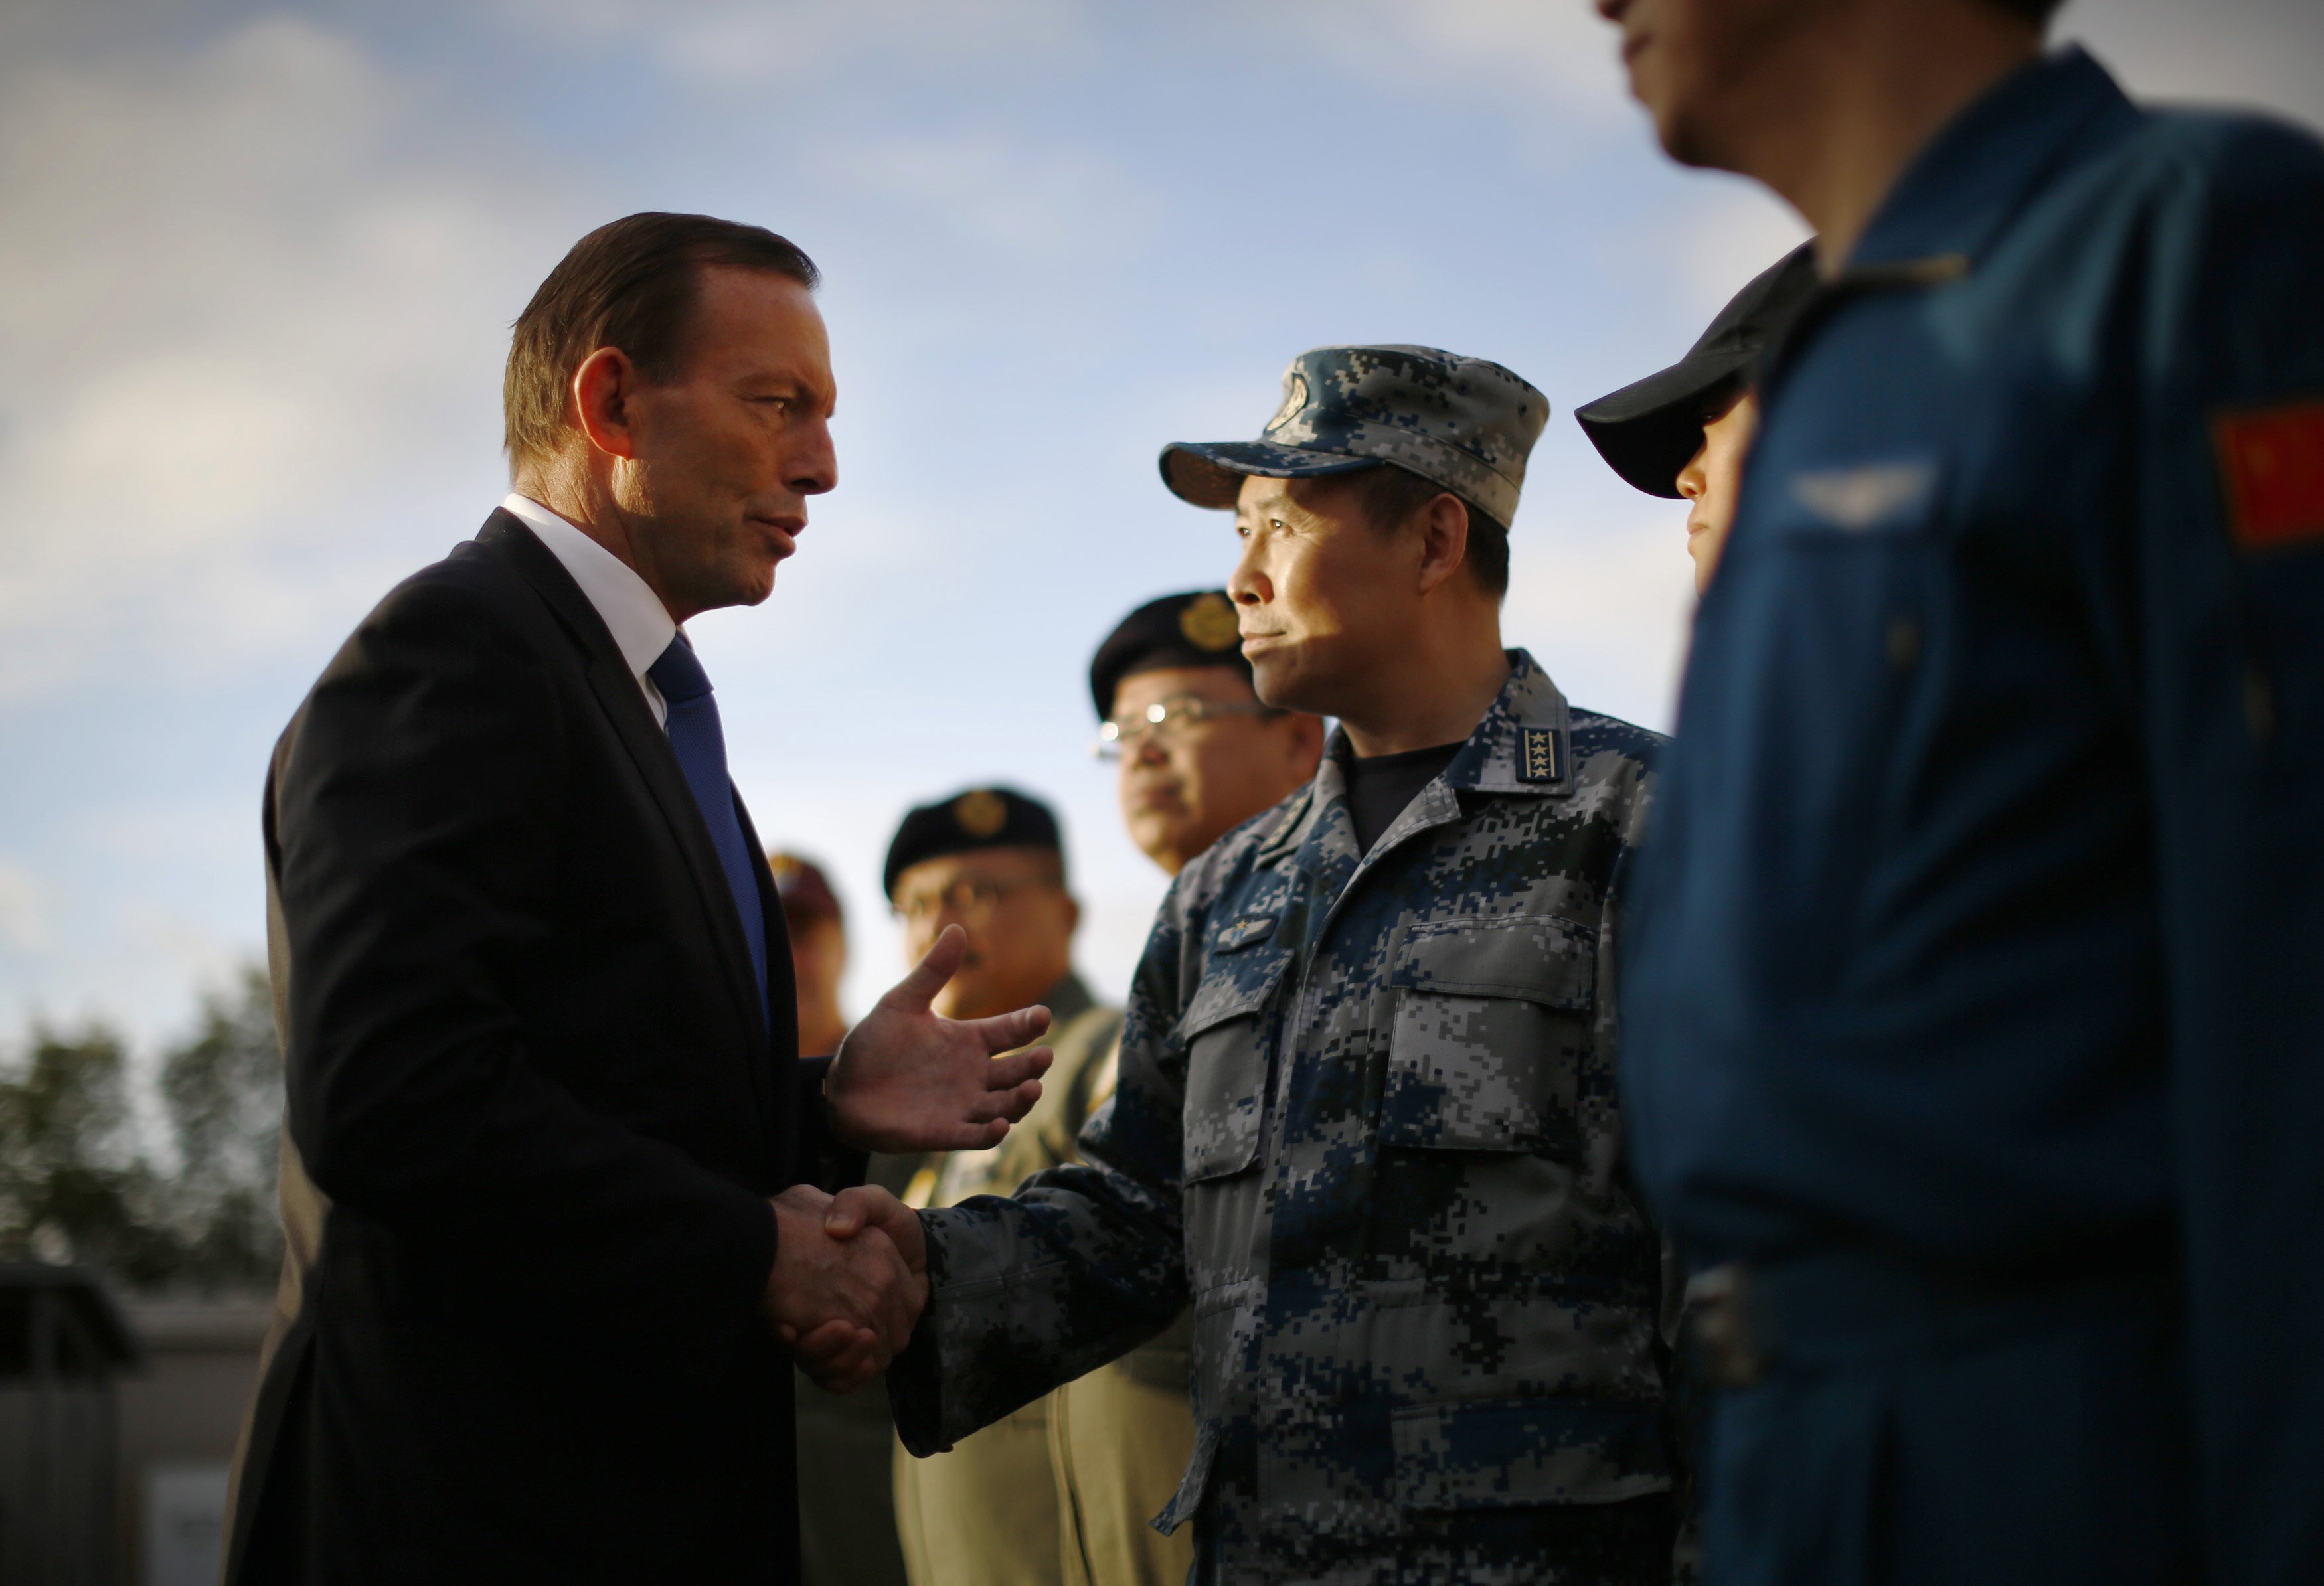 Australian Prime Minister Tony Abbott speaks with China's Air Force Senior Colonel Liu Dian Jun, head of China's effort to locate Malaysia Airlines flight MH370, during his visit to RAAF Base Pearce on March 31, 2014 in Perth, Australia. (Jason Reed—Getty Images)